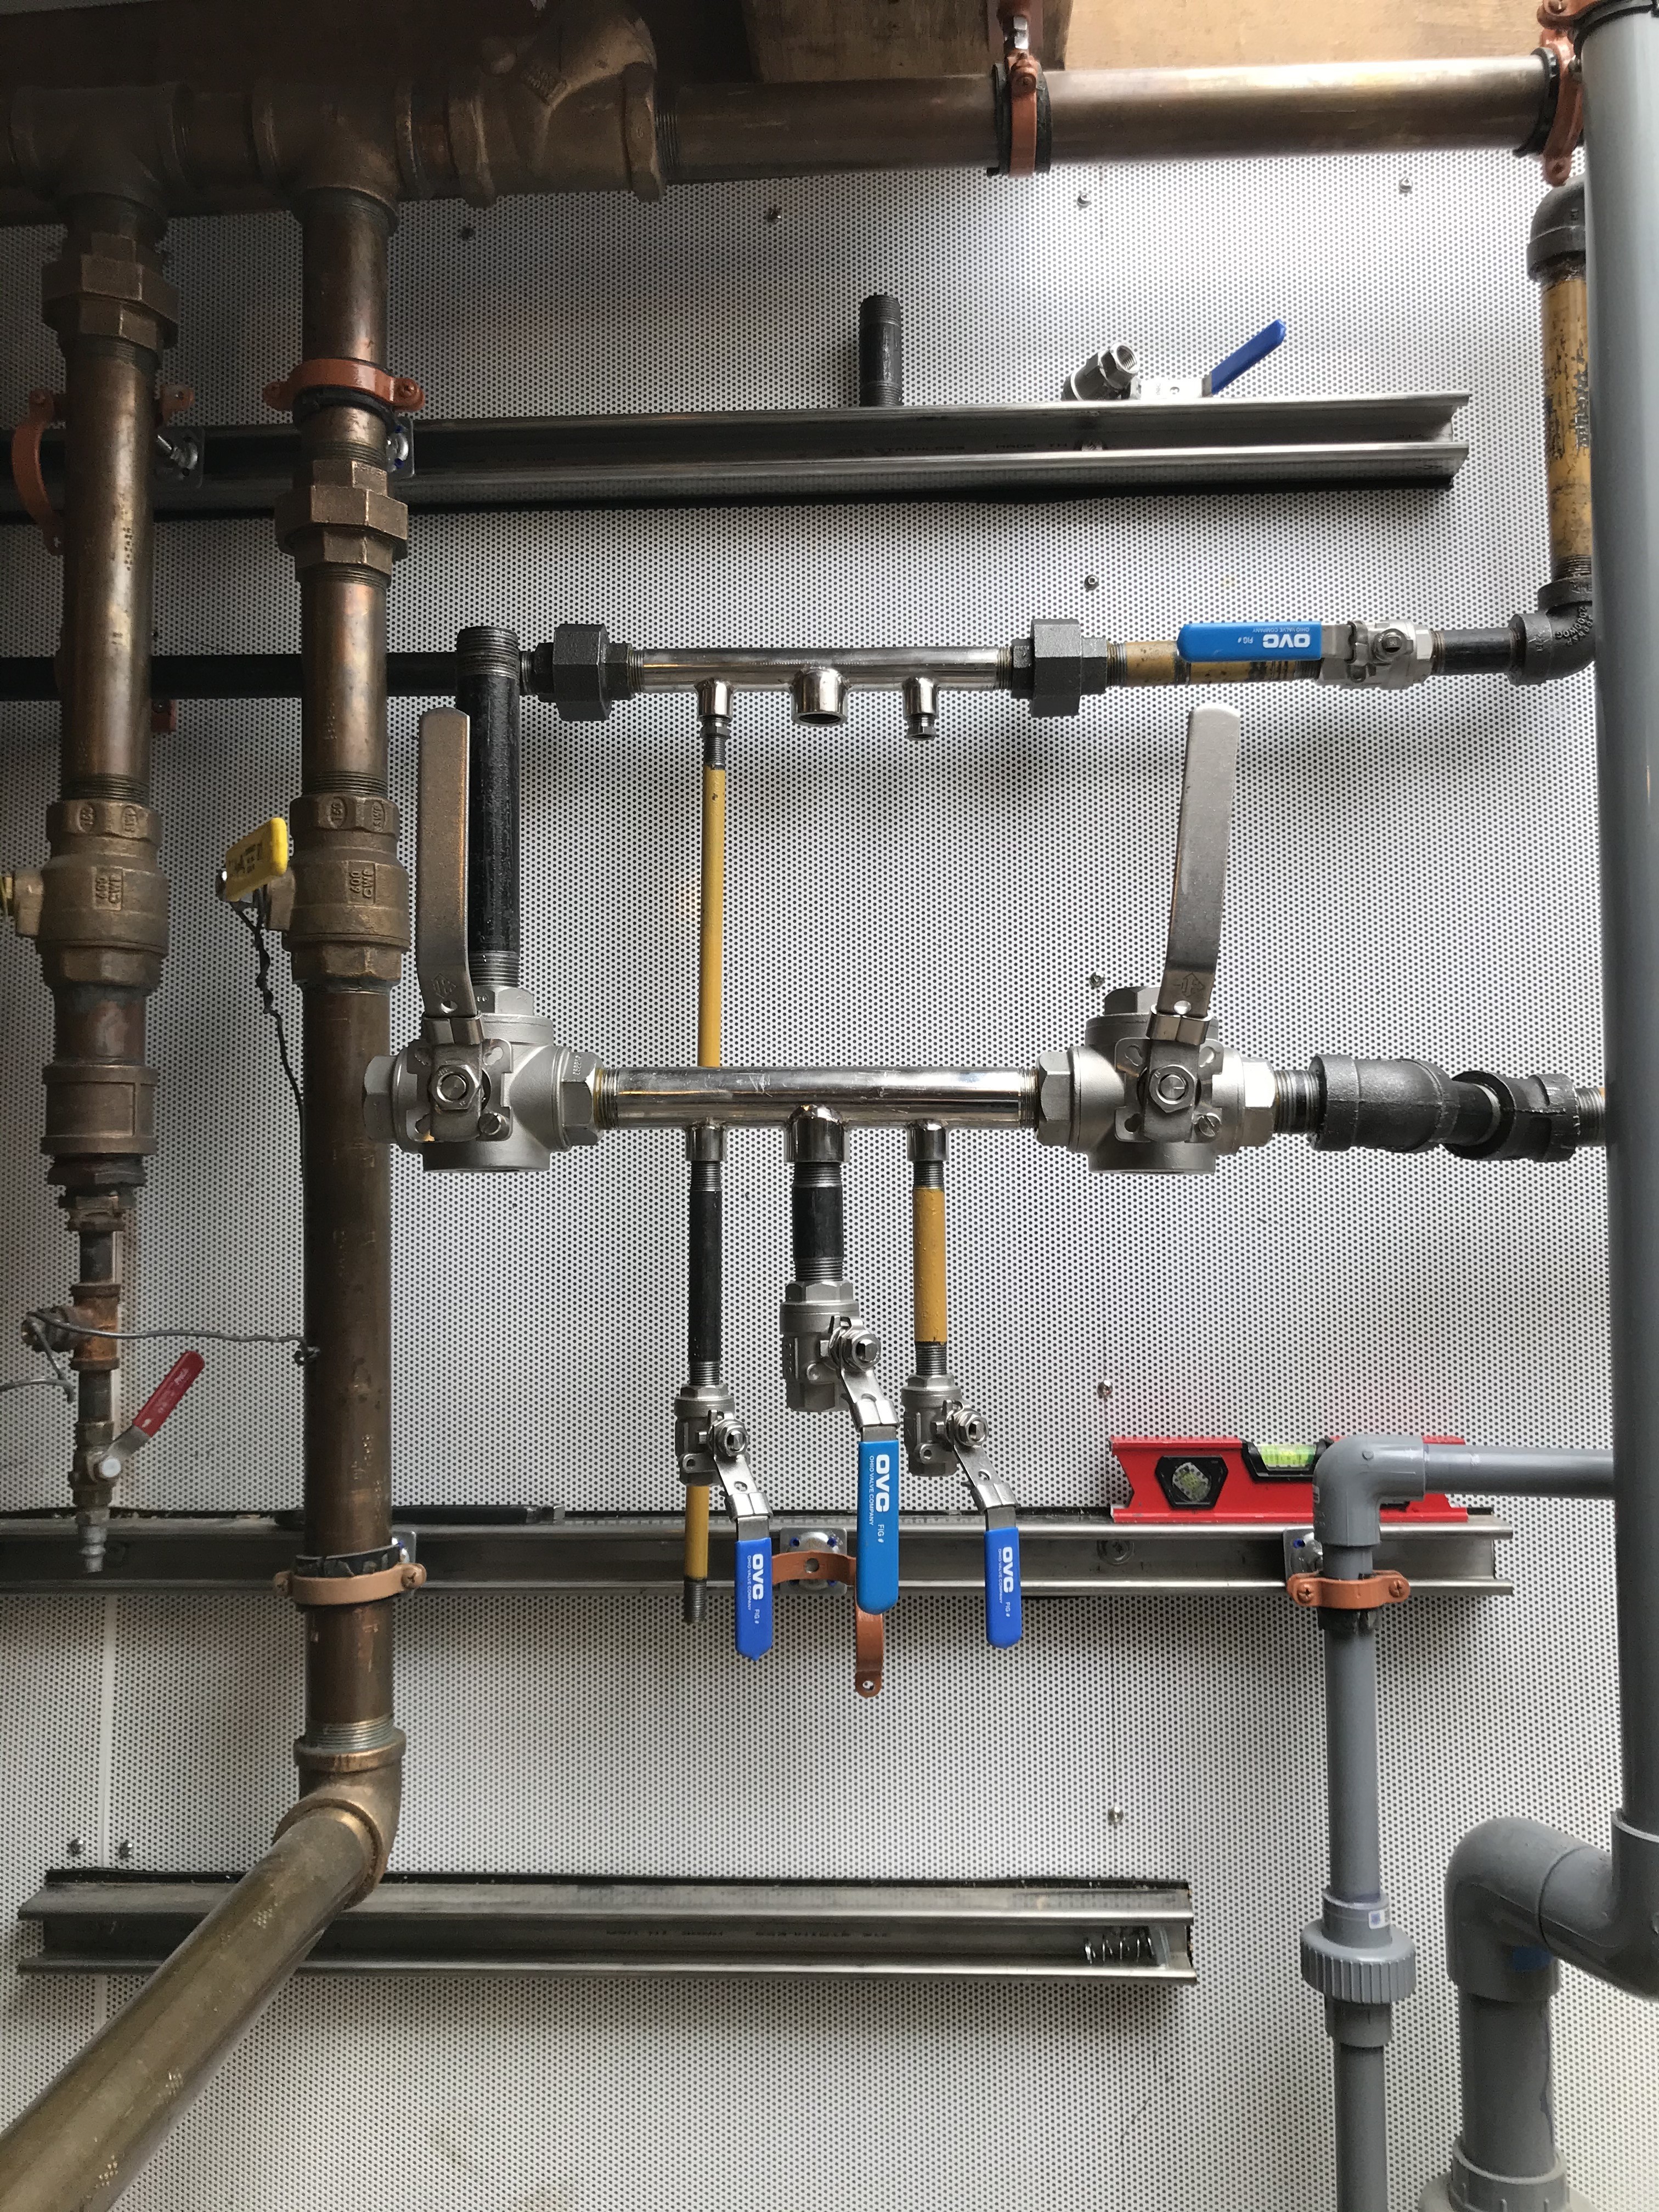 More detailed plumbing from the Engine Room.  This image shows the feed and return manifolds with associated plumbing being fitted in place.